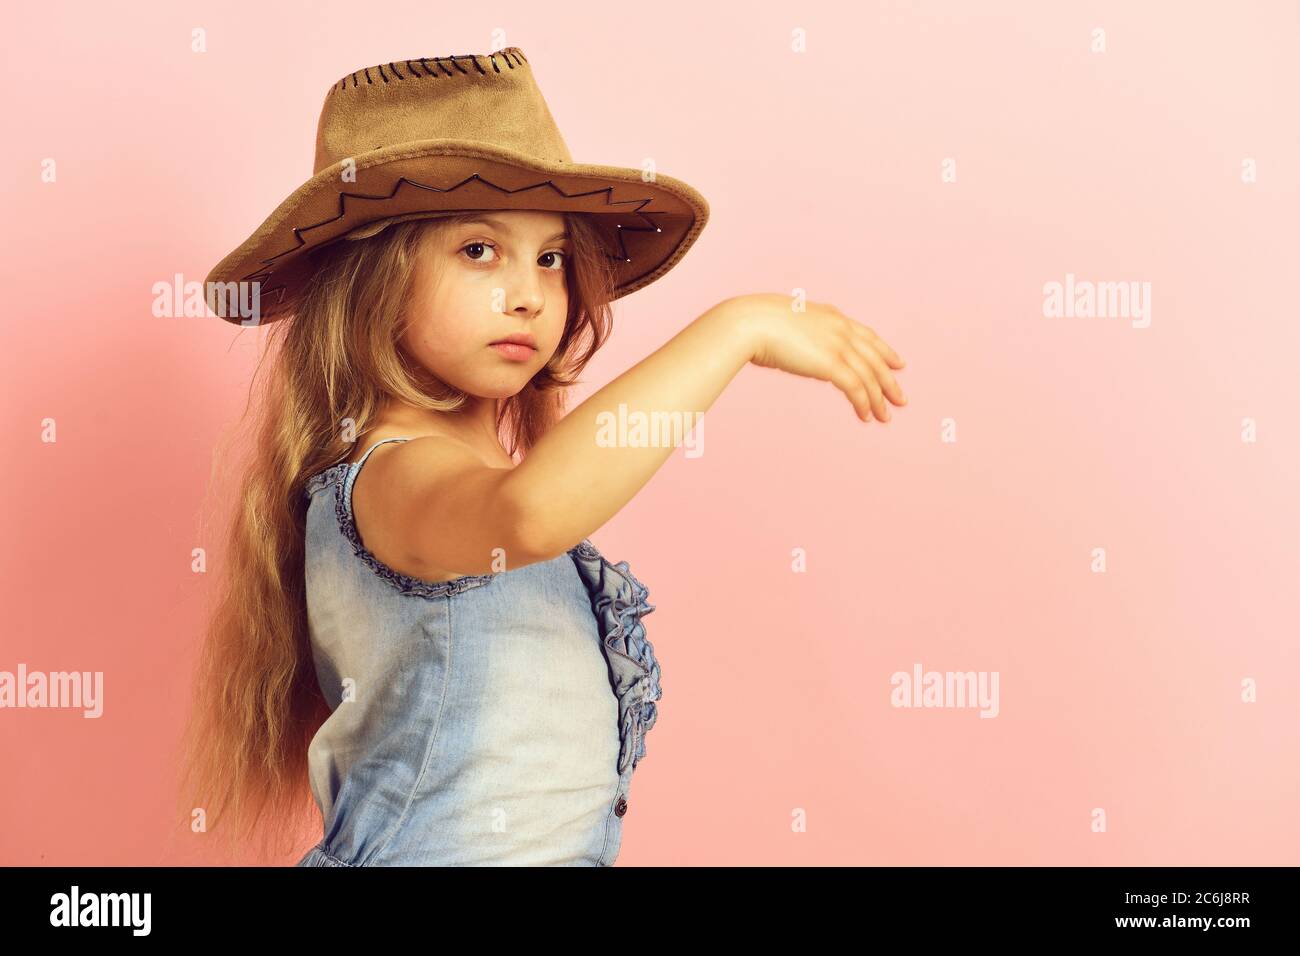 Kid with serious face and long fair hair wears jeans dress. Fashion and  casual style concept. Girl in fancy outfit wears cowboy hat. Little lady in  stylish clothes on pink background, copy